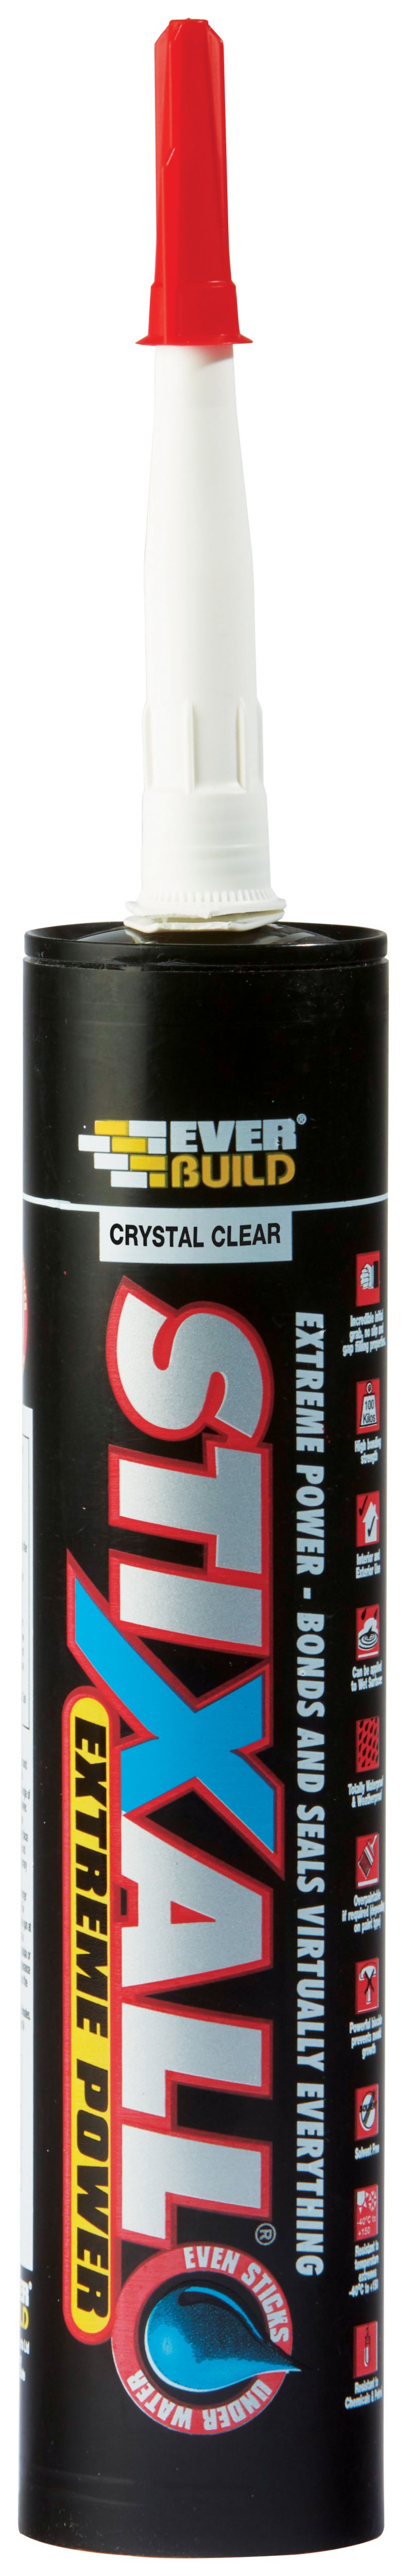 Image of Everbuild Stixall Extreme Power 290ml Sealant & Adhesive - Crystal Clear